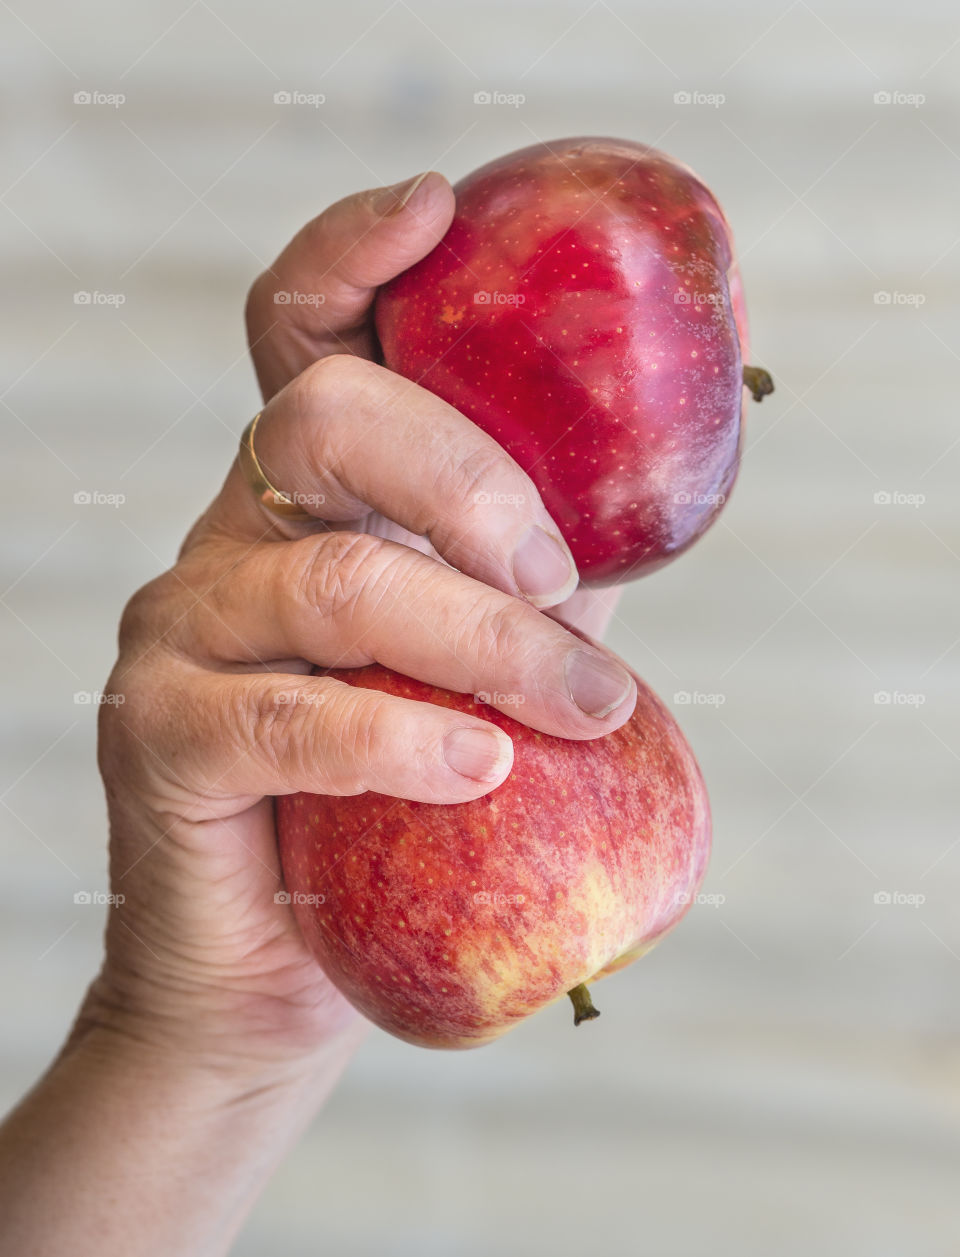 Two red apples in human hand